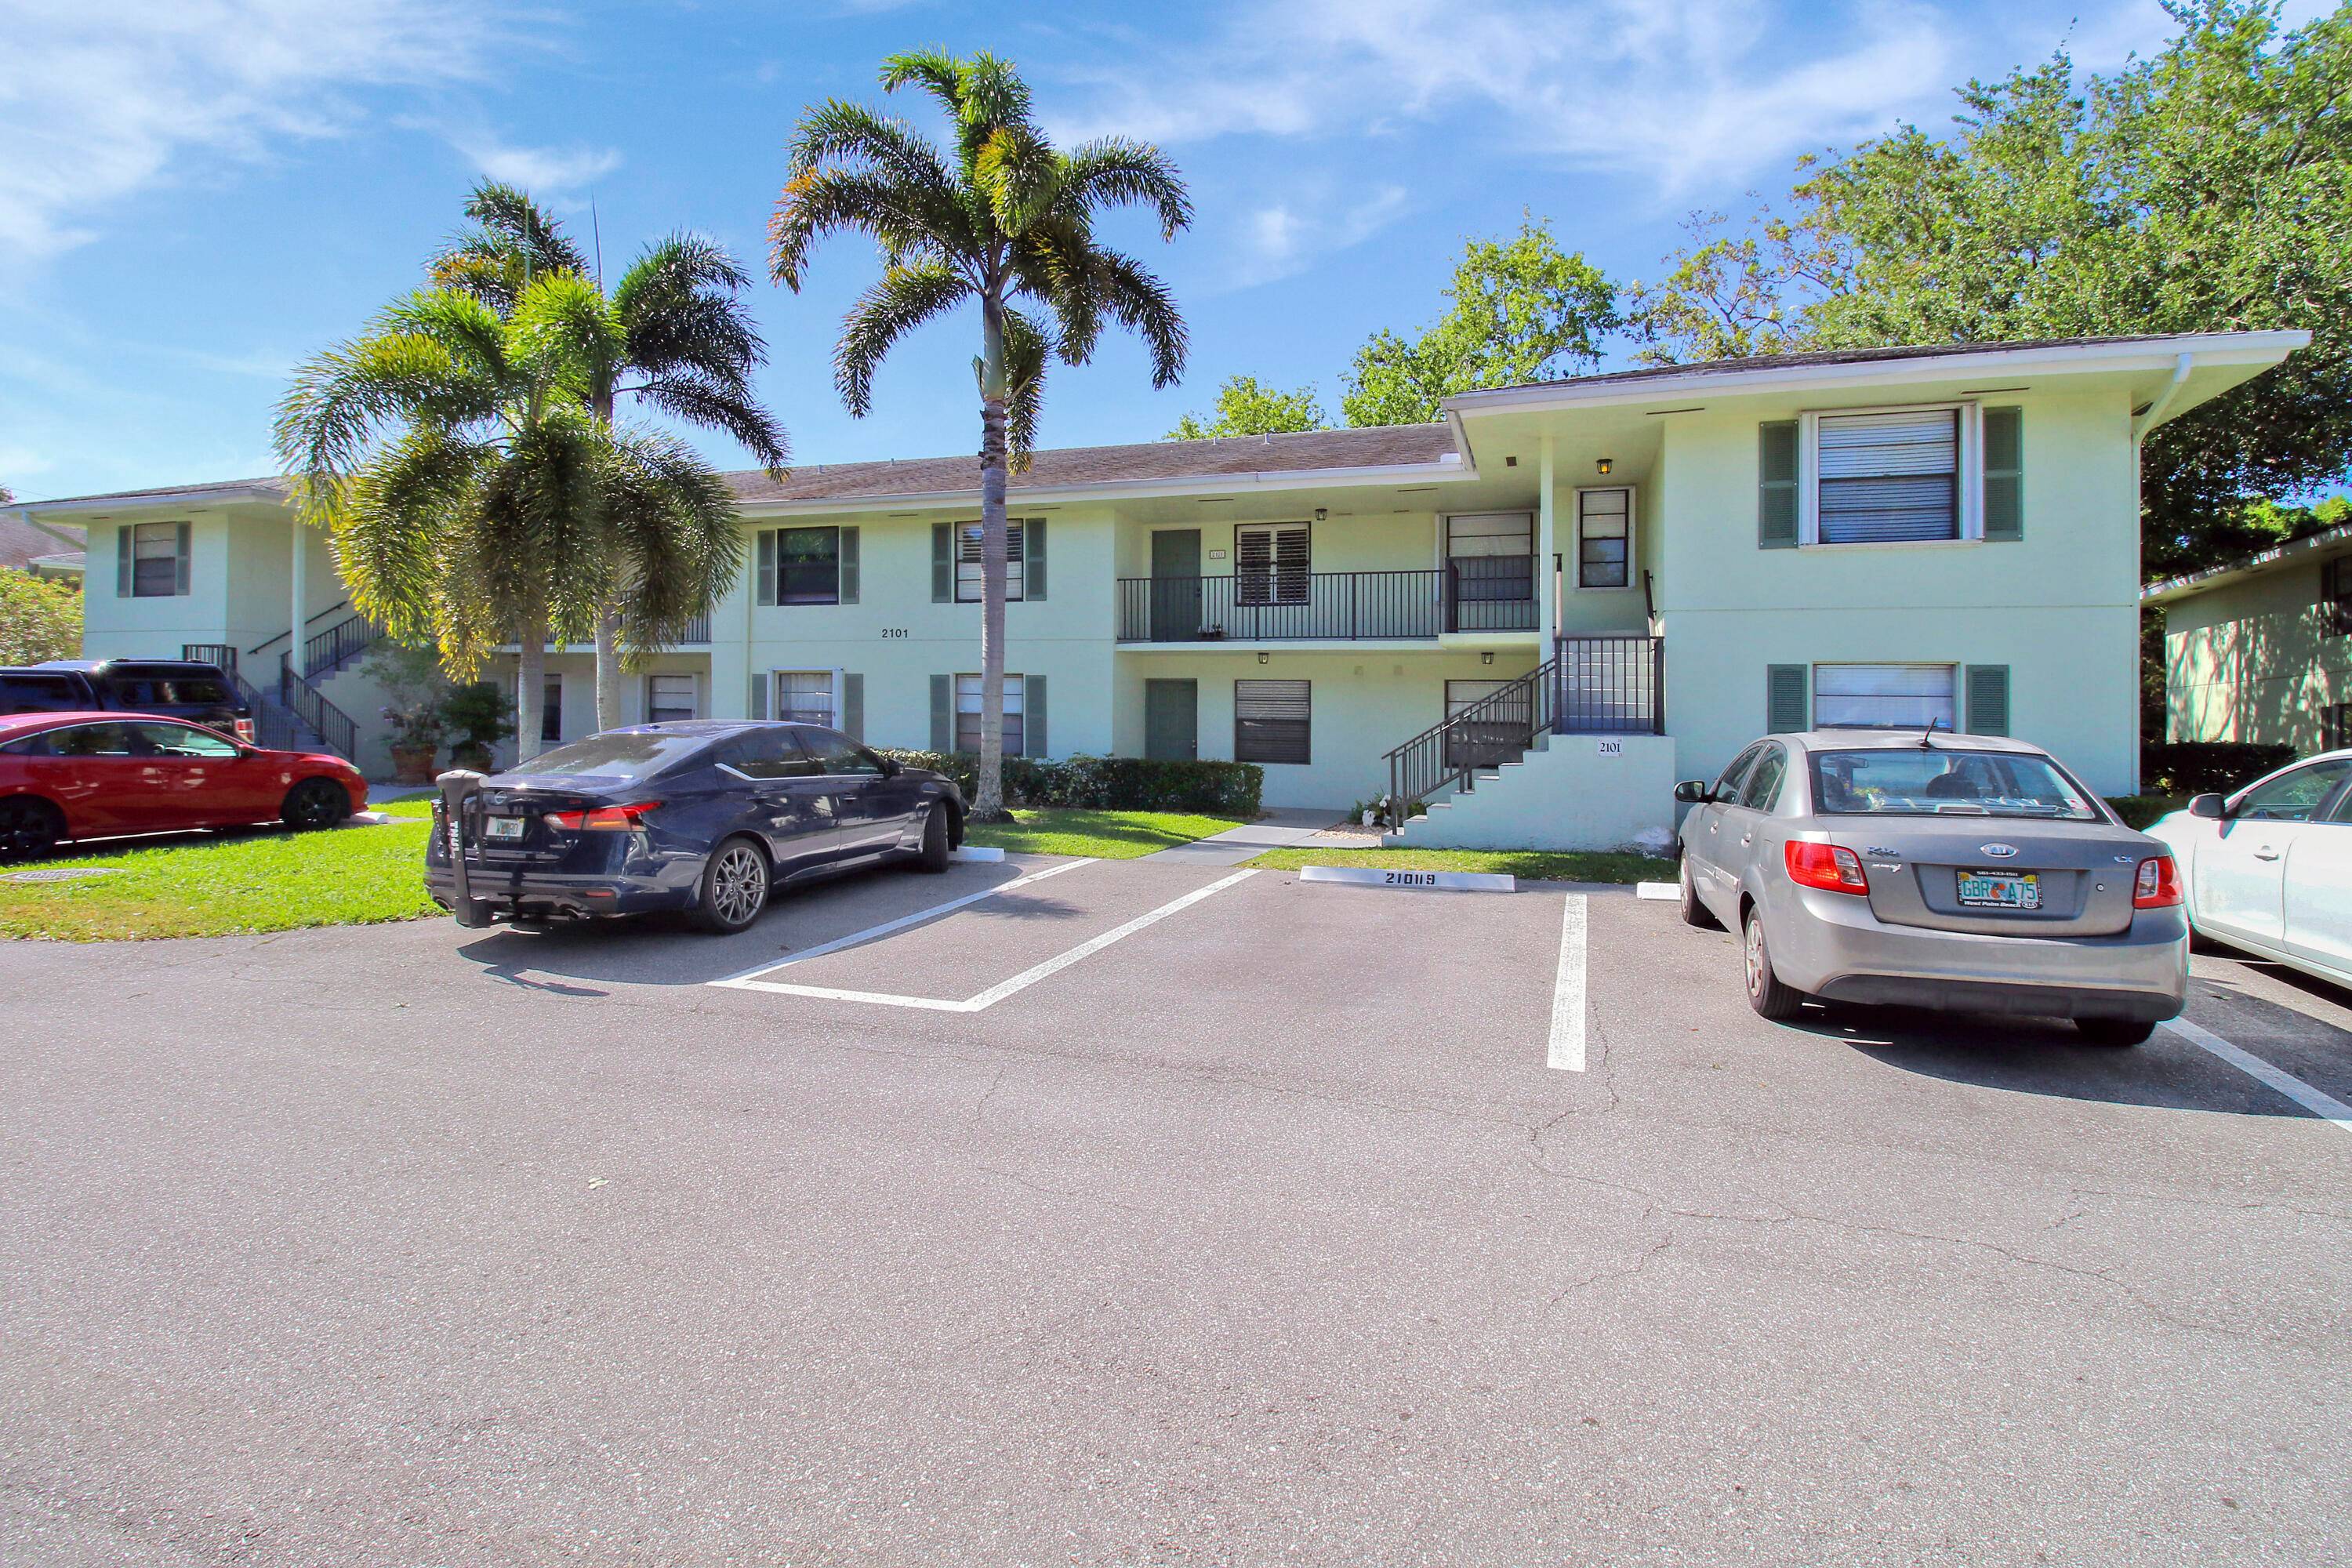 Discover your perfect blend of convenience and tranquility with this spacious FIRST floor 3 bedroom, 2 bathroom corner unit condo ideally situated near shopping centers, major highways such as 95 ...